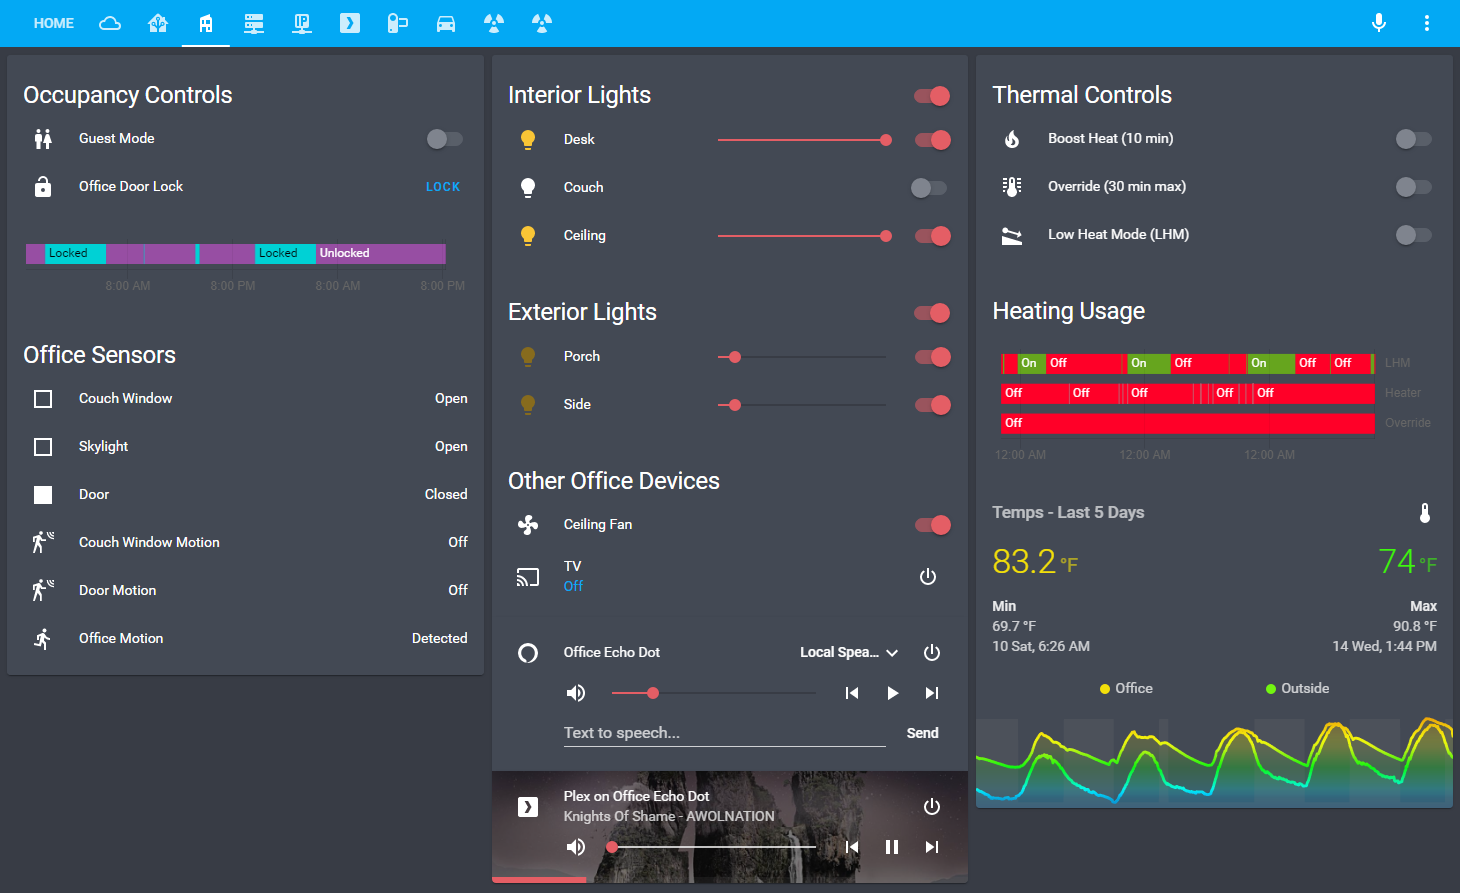 Complex Dashboard design - How to fit a lot of stuff? : r/homeassistant